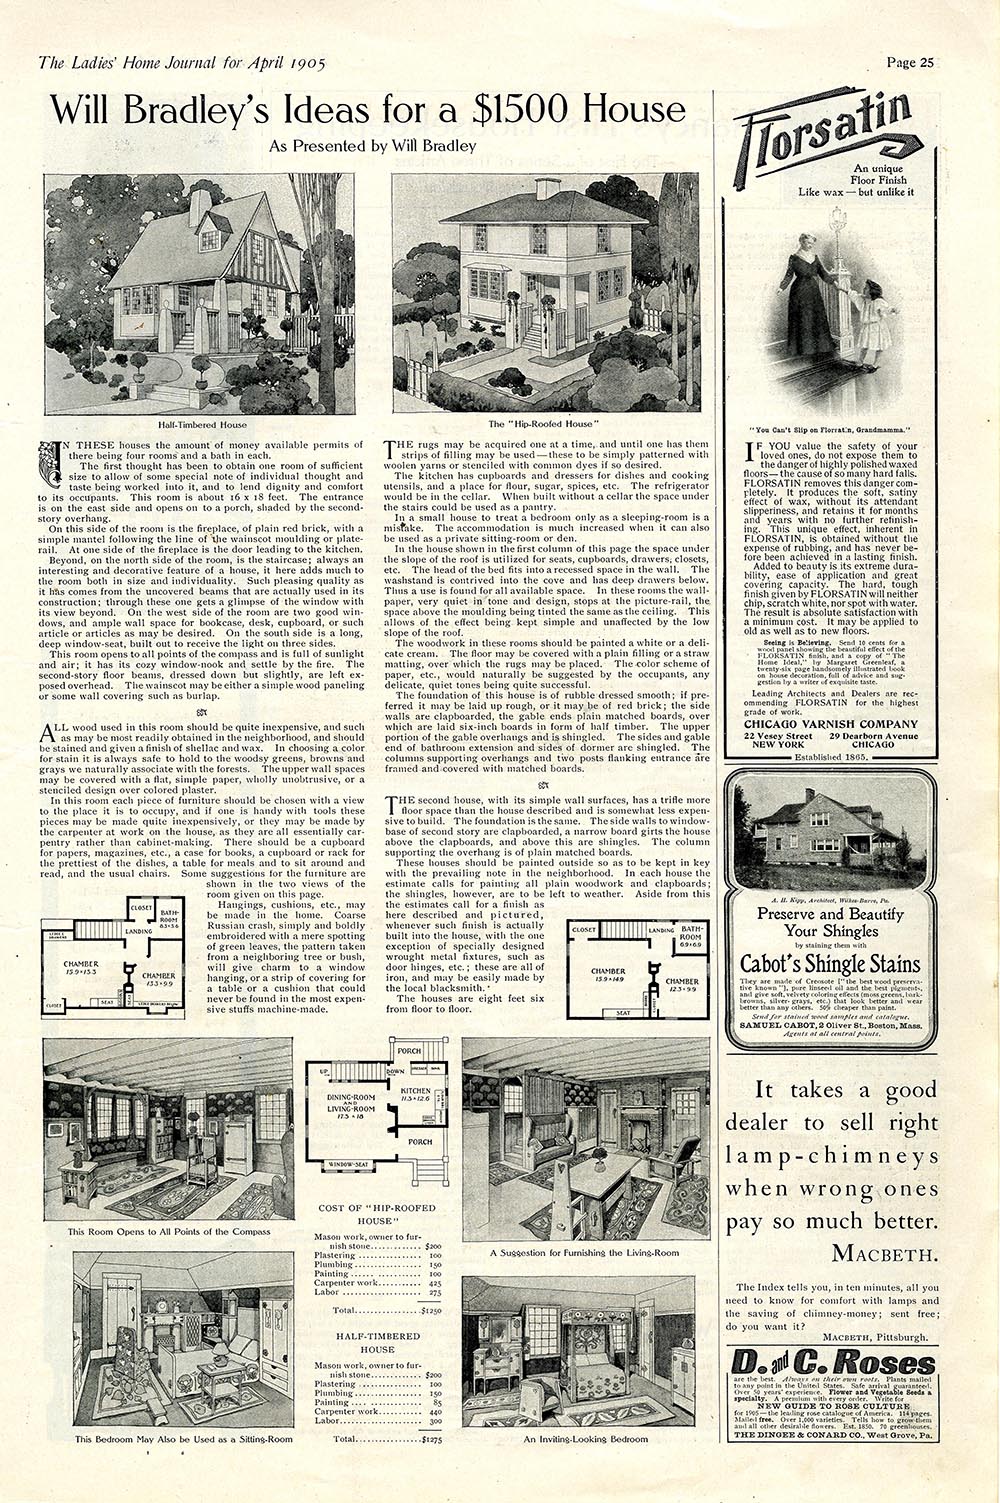 “Will Bradley’s Ideas for a $1500 House as Presented by Will Bradley,” Ladies’ Home Journal, April 1905.